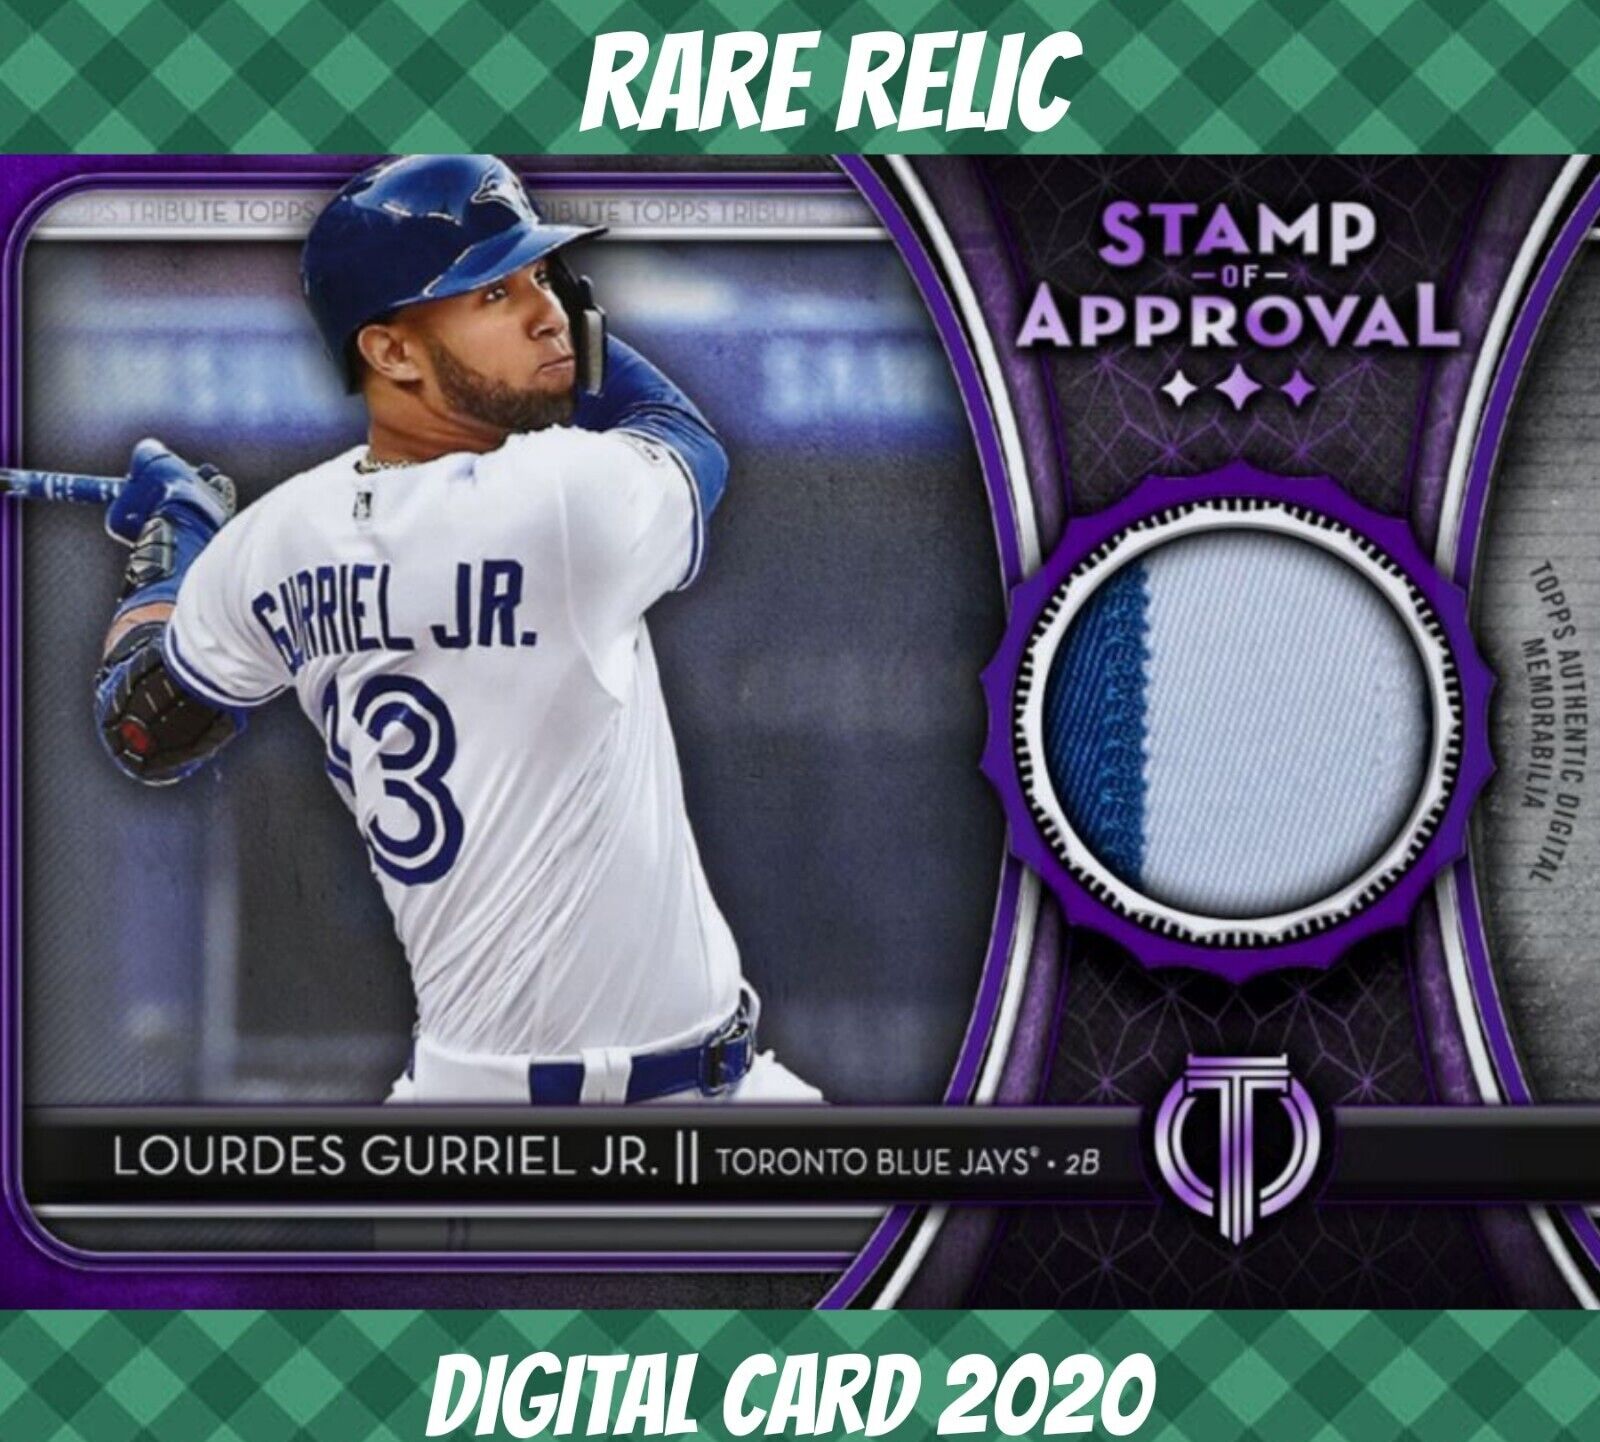 Rare Heavy Colorful Topps Gurriel Jr. 2020 Stamp Relic Approval Digital Tribute